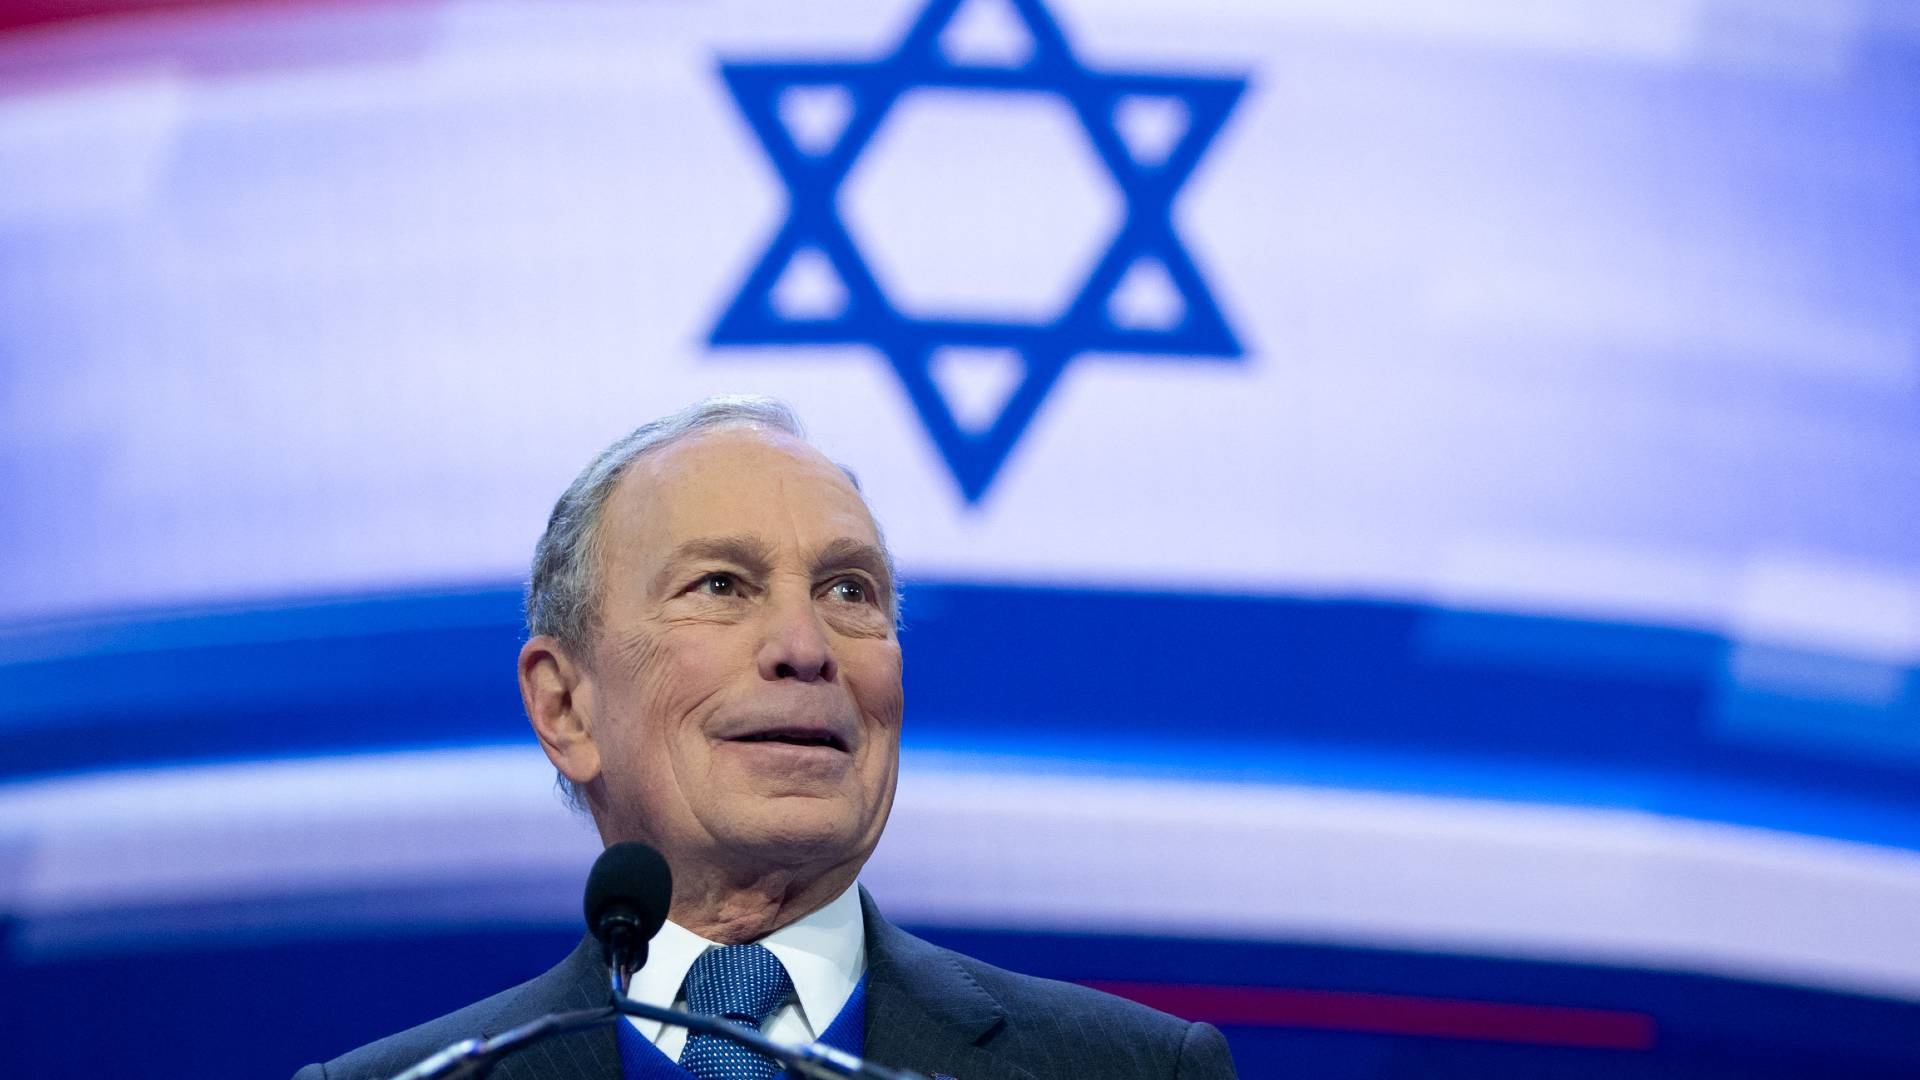 Former New York City Mayor Mike Bloomberg speaks during the American Israel Public Affairs Committee 2020 Policy Conference in Washington on 2 March 2020